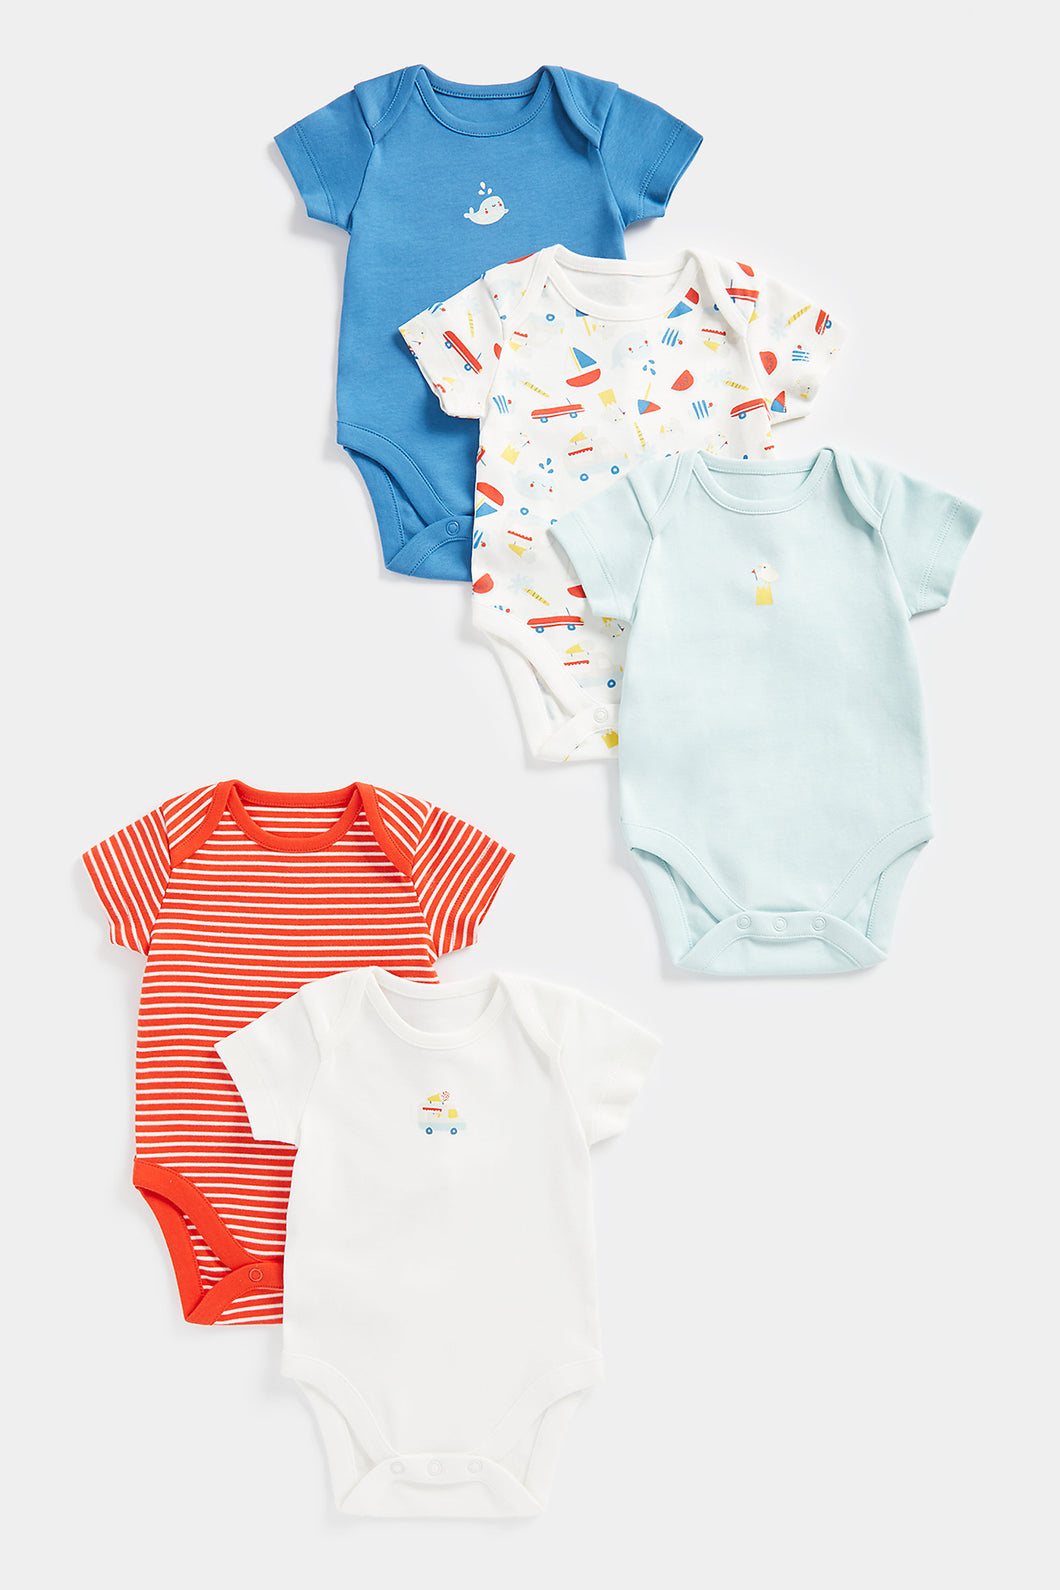 Mothercare Whale Beach Short-Sleeved Bodysuits - 5 Pack